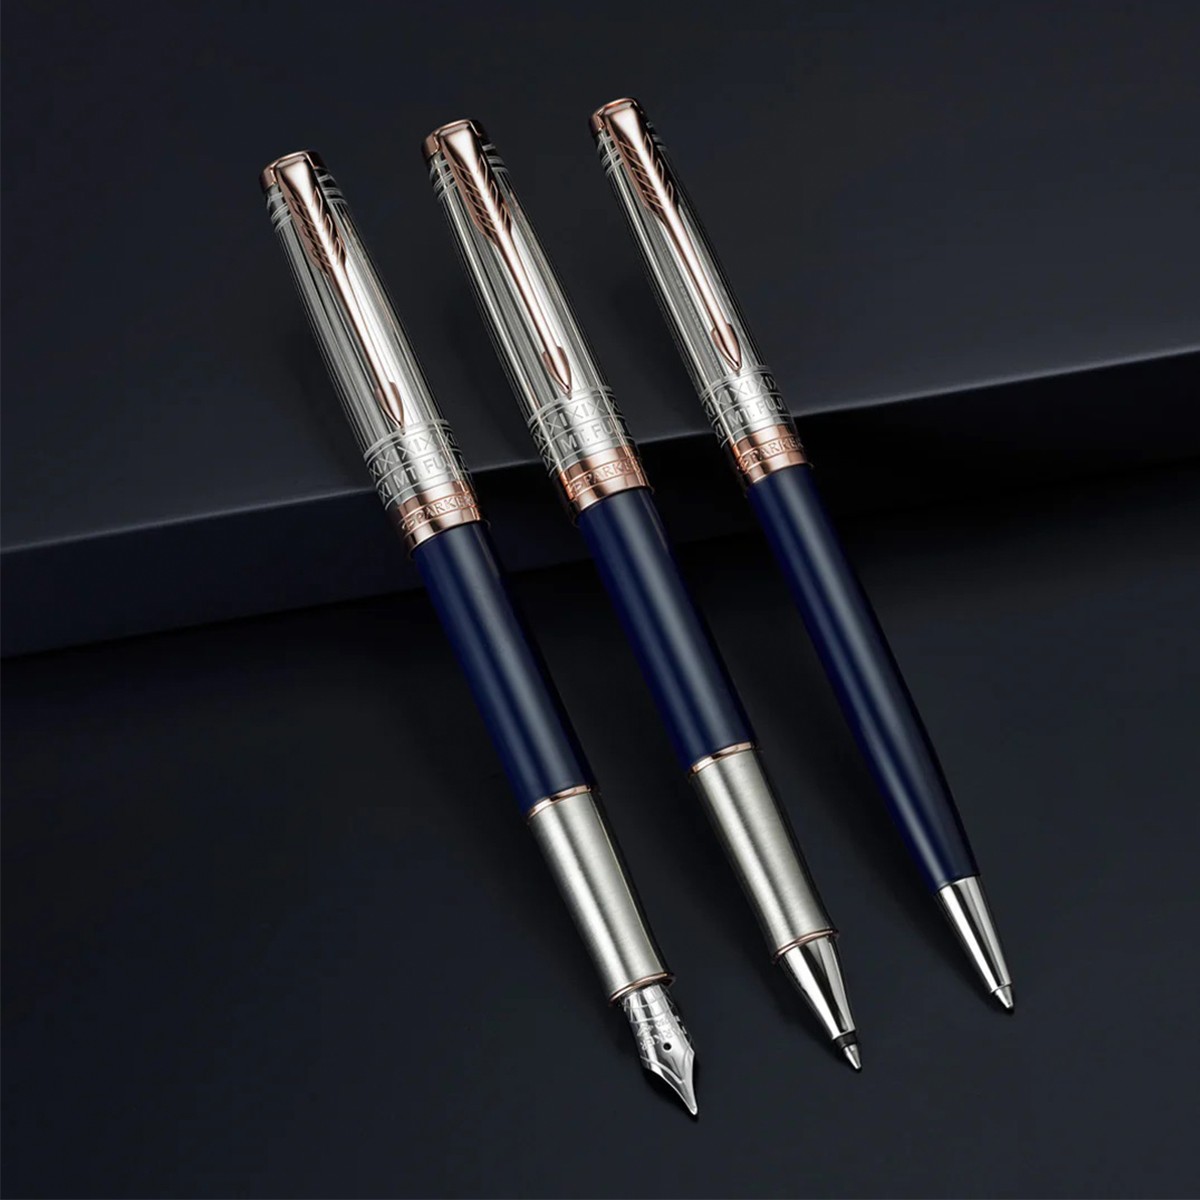 PARKER Sonnet Intrepid Journeys Collection Mt. Fuji Edition Στυλό Roller